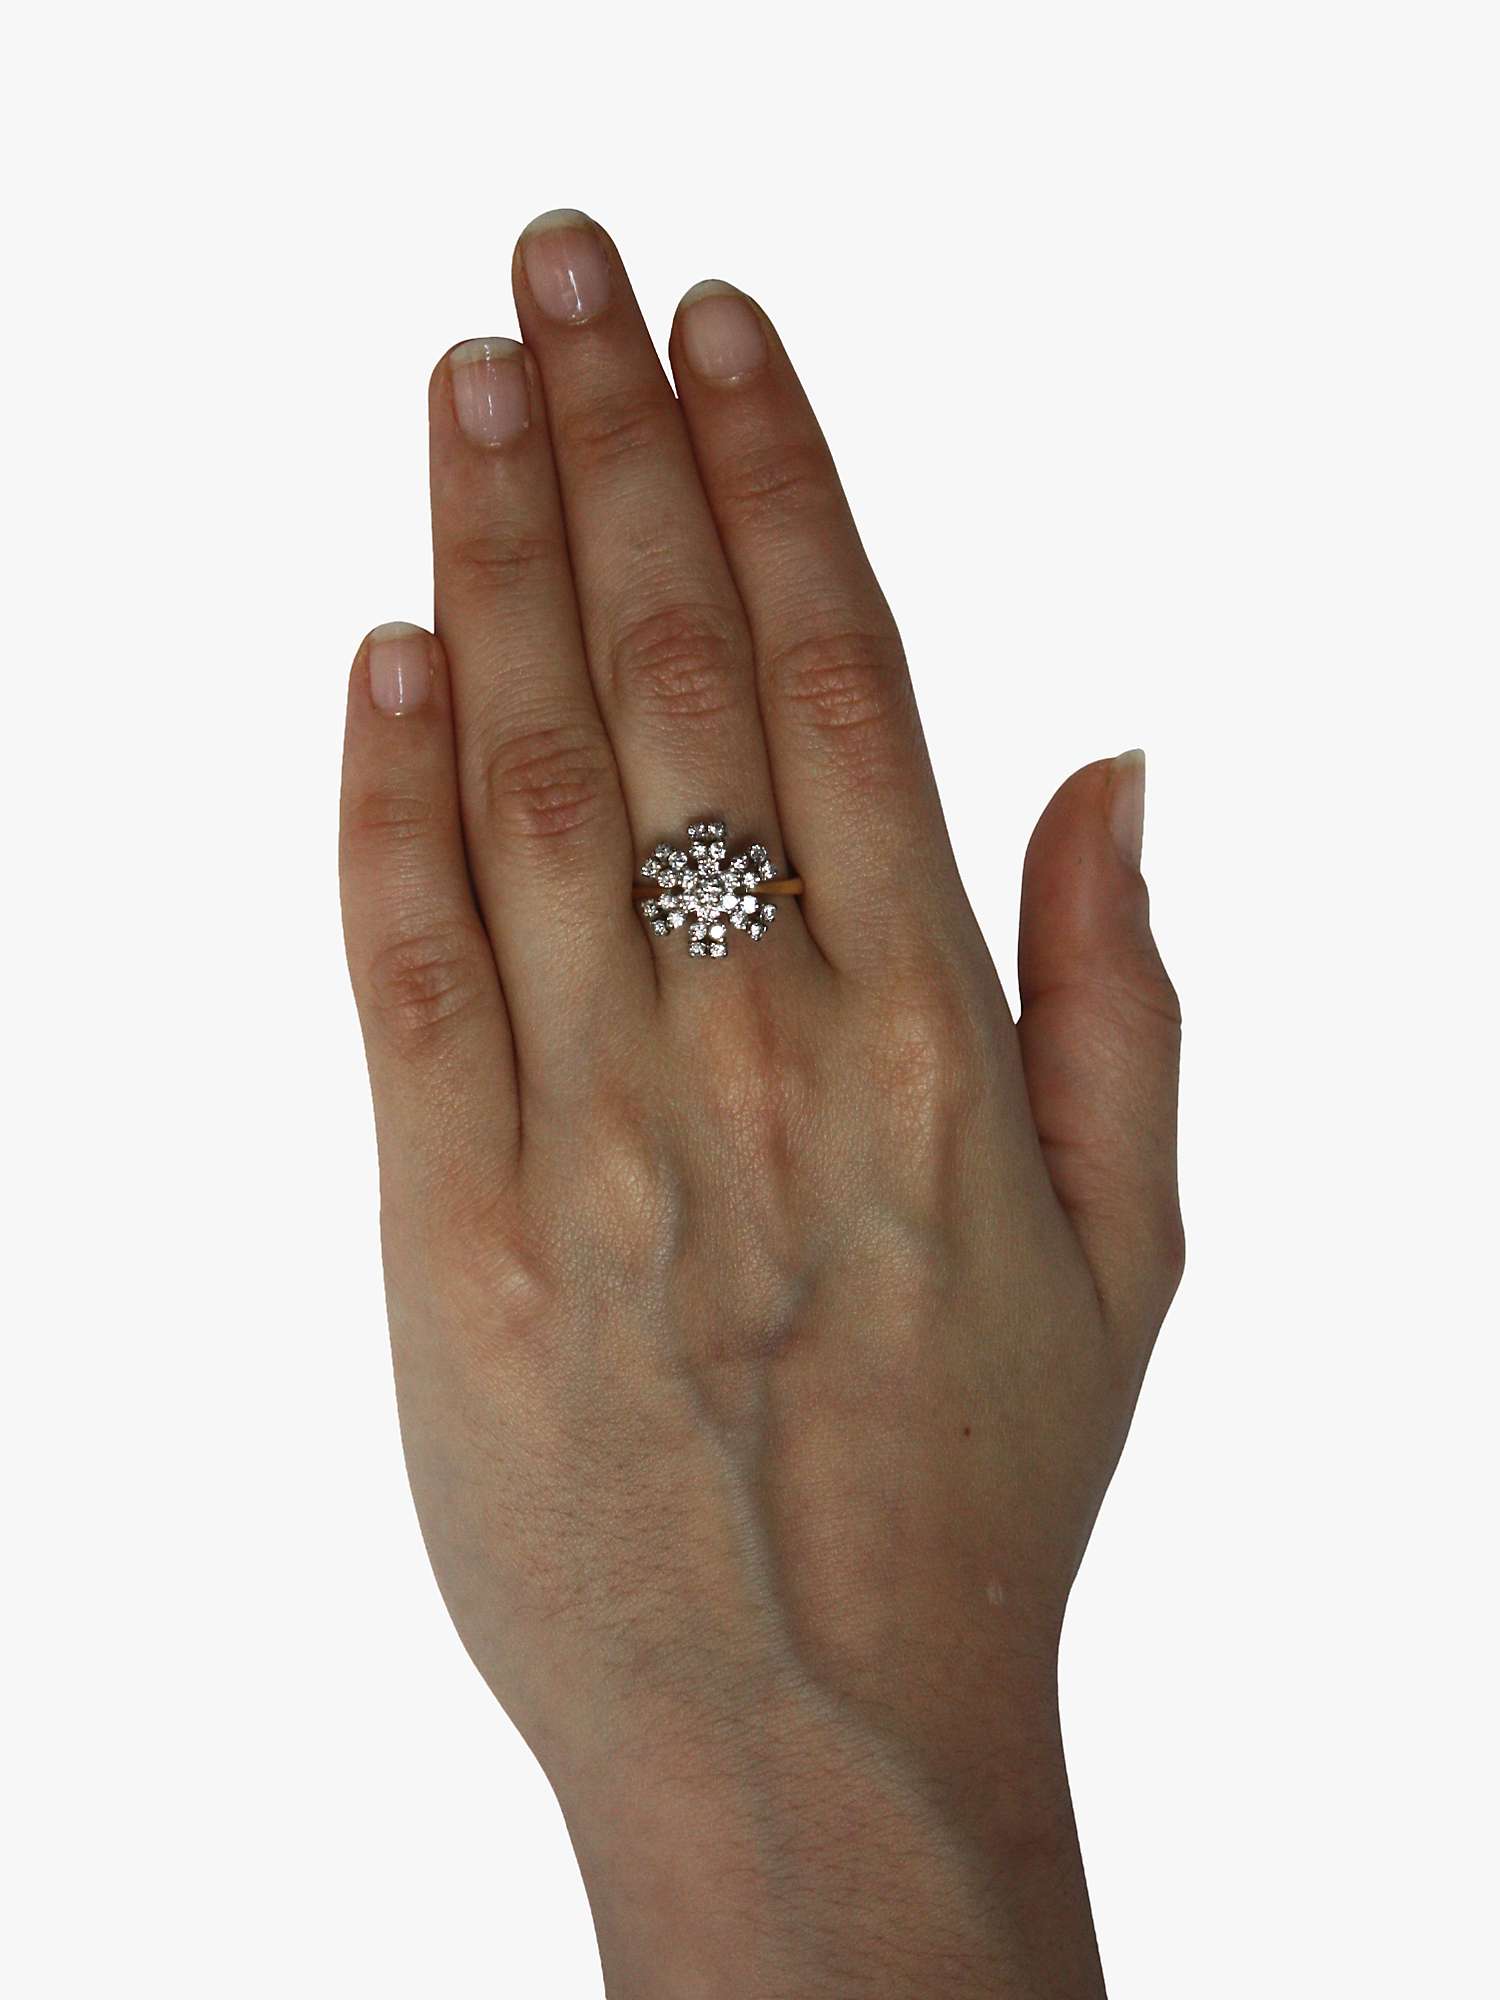 Buy Vintage Fine Jewellery Second Hand 18ct Yellow & White Gold Asterik Diamond Ring, Dated 1977 Online at johnlewis.com